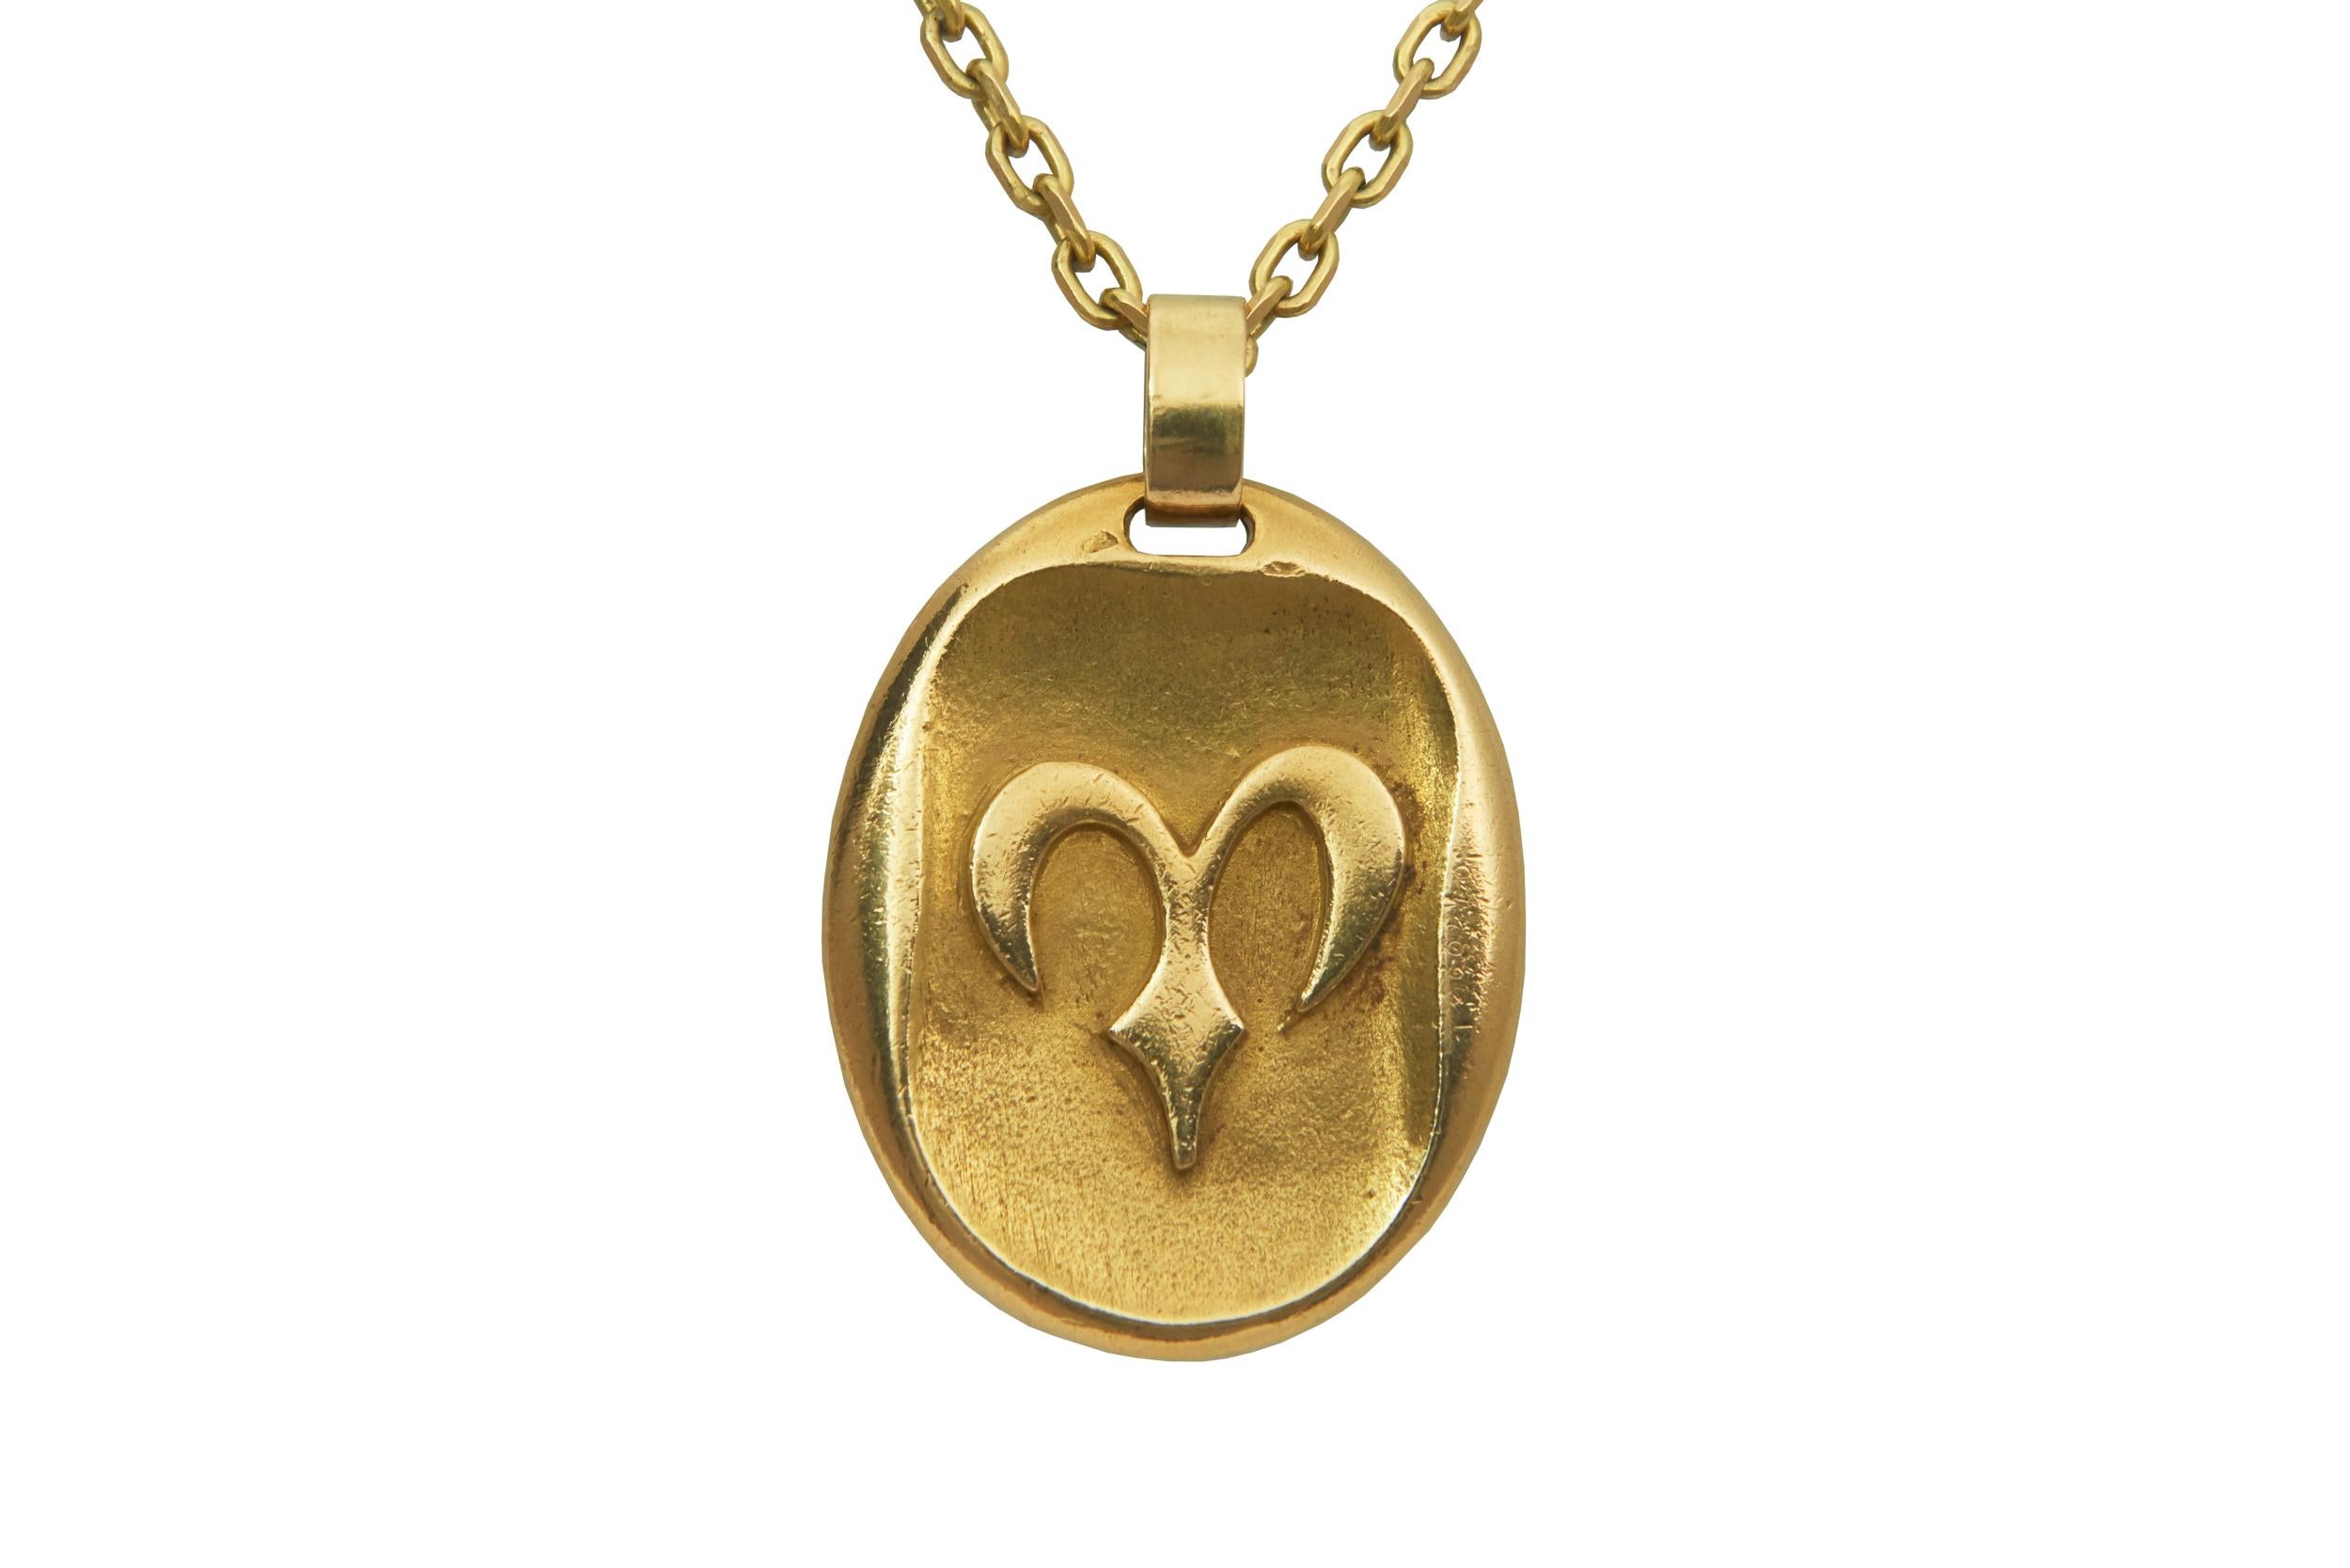 A rare and highly collectible, vintage, 18 karat yellow gold Aries zodiac pendant, by Cartier, c. 1970. Stamped Cartier Paris, 750, French assay marks, (partial) George Lenfant maker's mark. The pendant is 1.5-inch long, and 34.88 grams,. 

Aries is